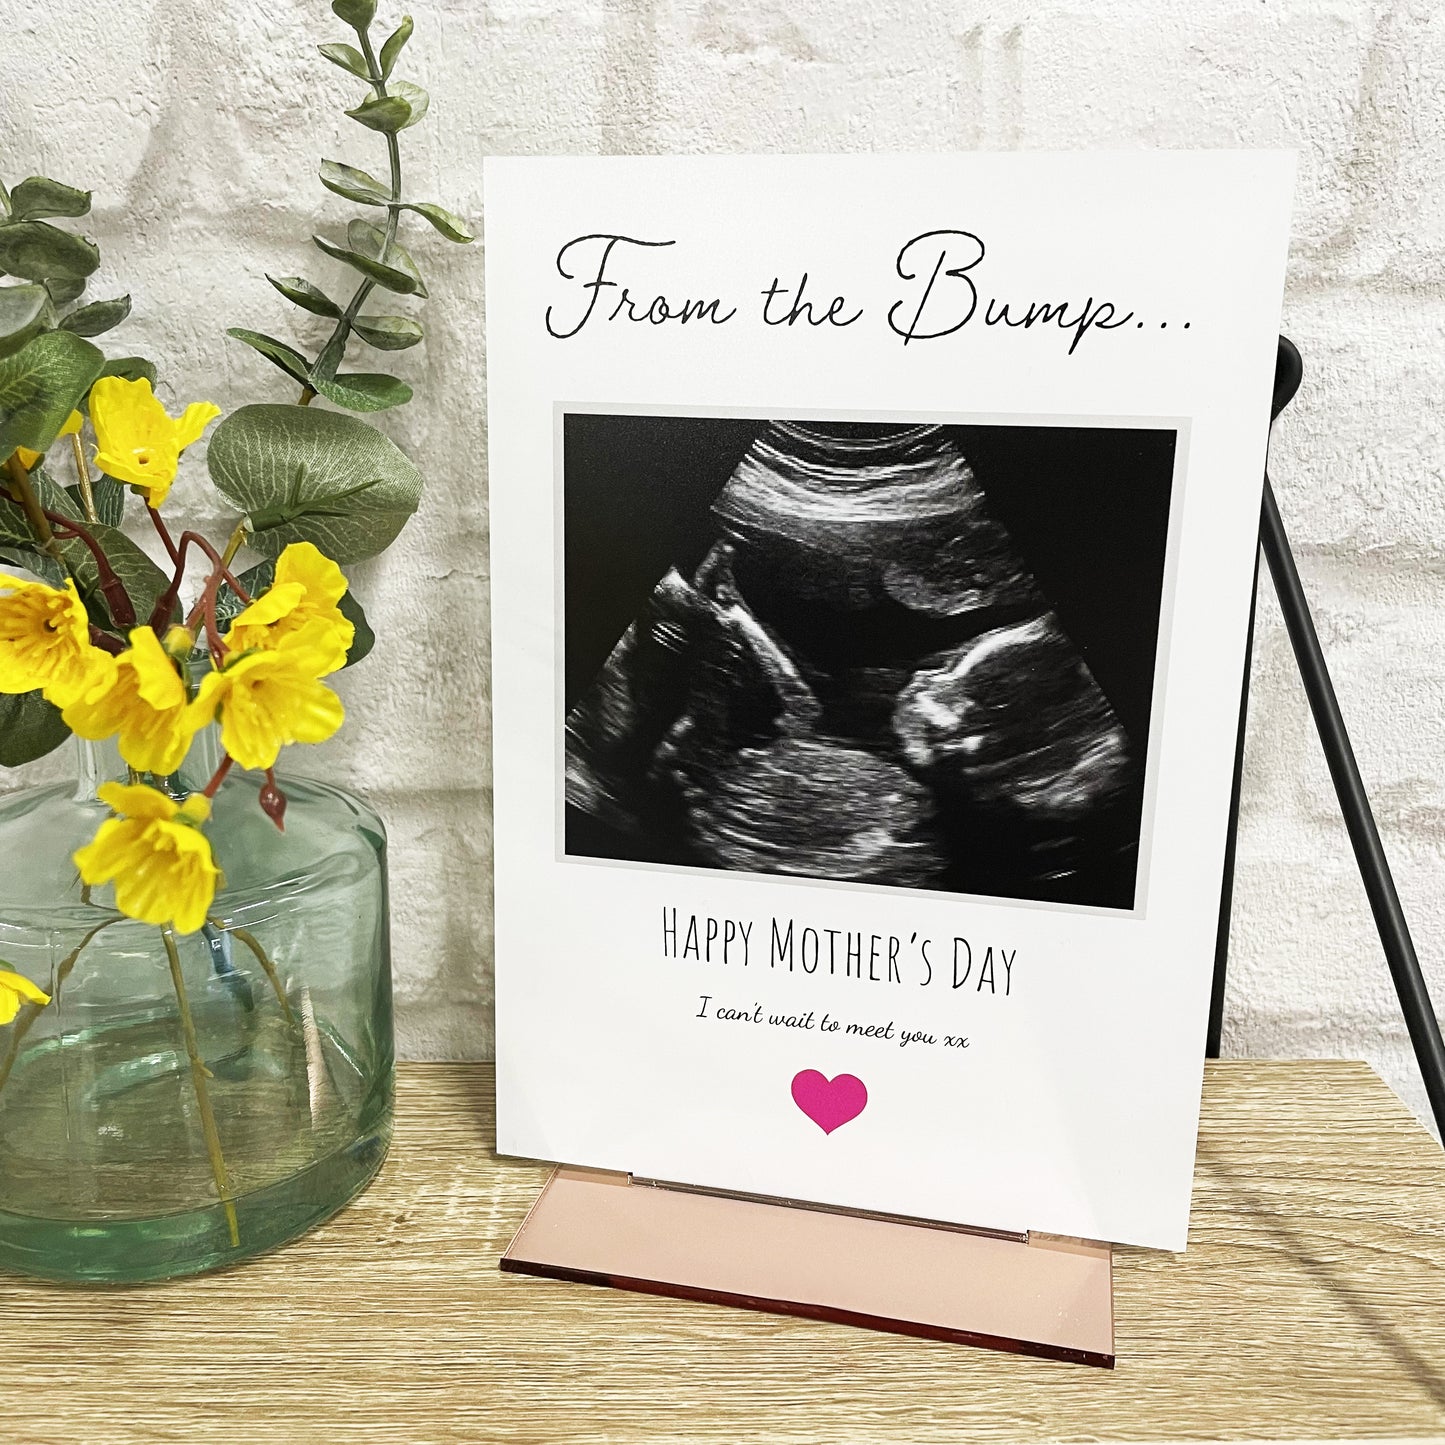 Personalised 'From the Bump' Acrylic Plaque with a Mirrored or Wooden Stand